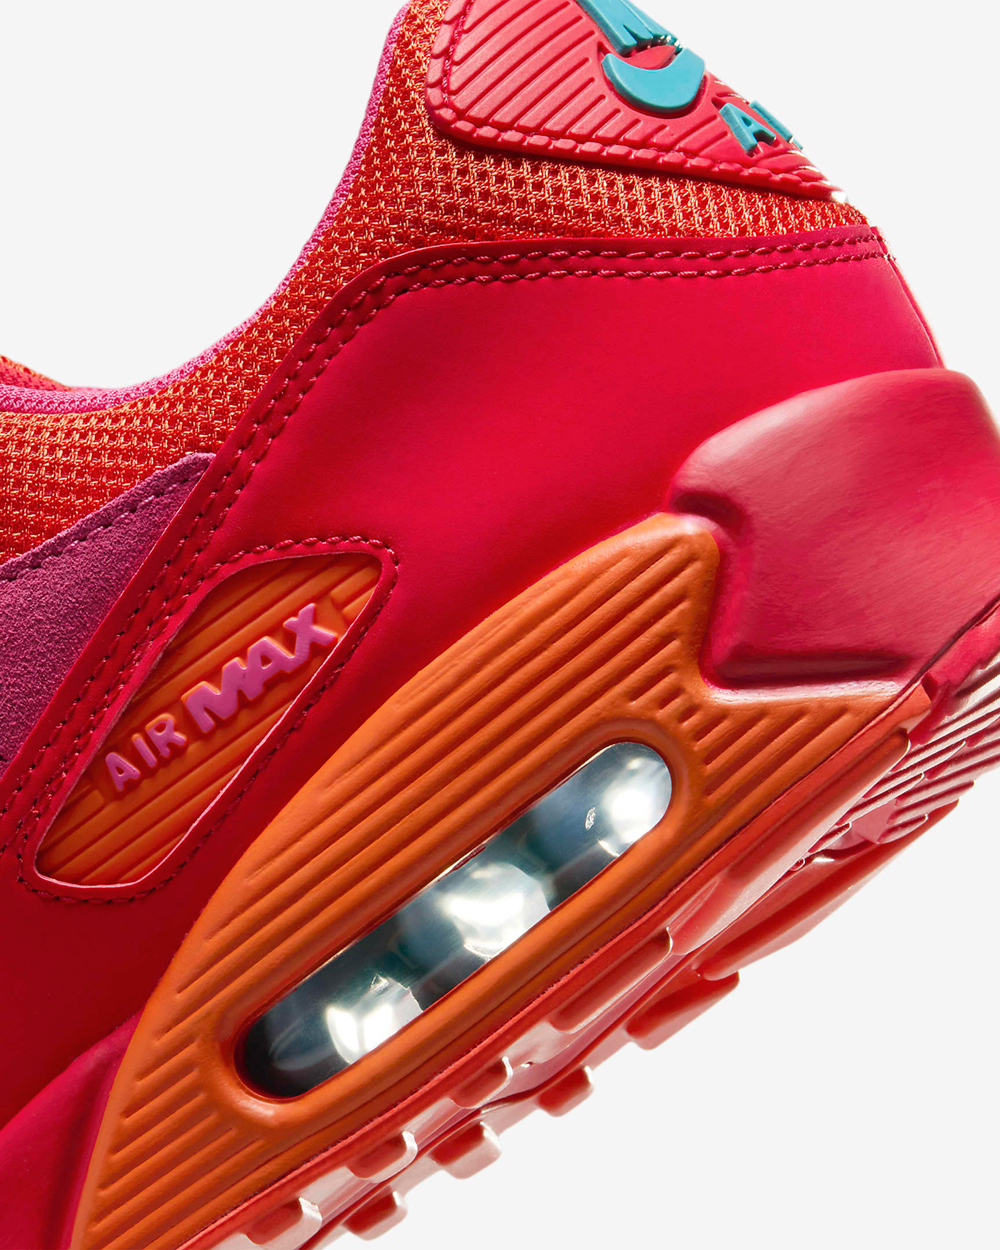 Nike-Air-Max-90-Alchemy-Pink-Cosmic-Clay-Fire-Red-Dusty-Cactus-Release-Date-7